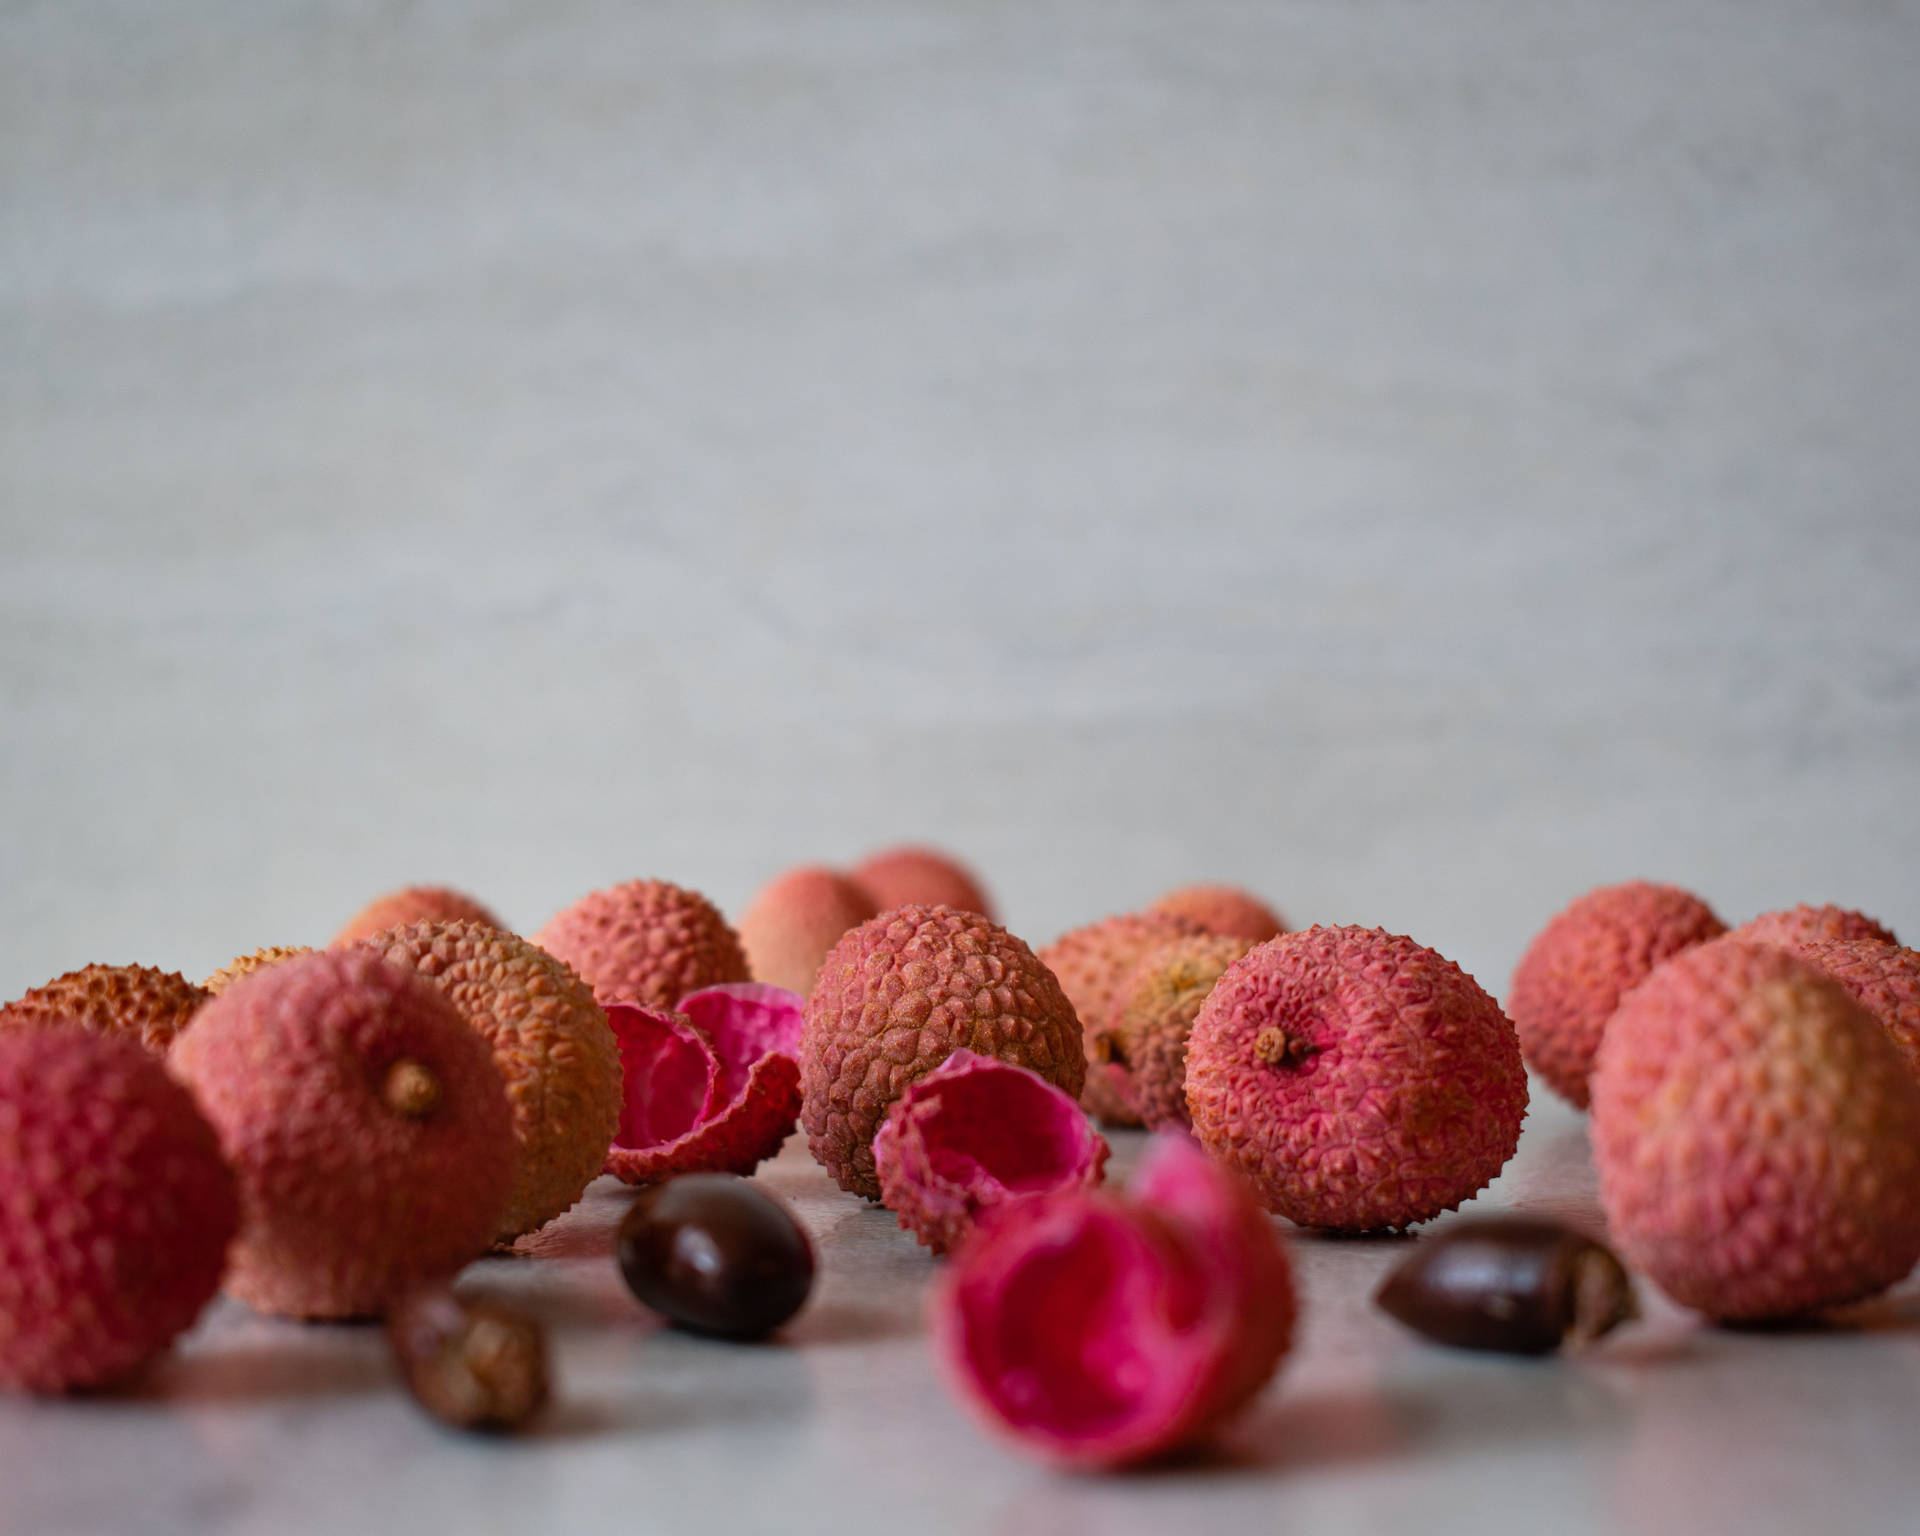 Aesthetic Litchi Fruits And Seeds Wallpaper